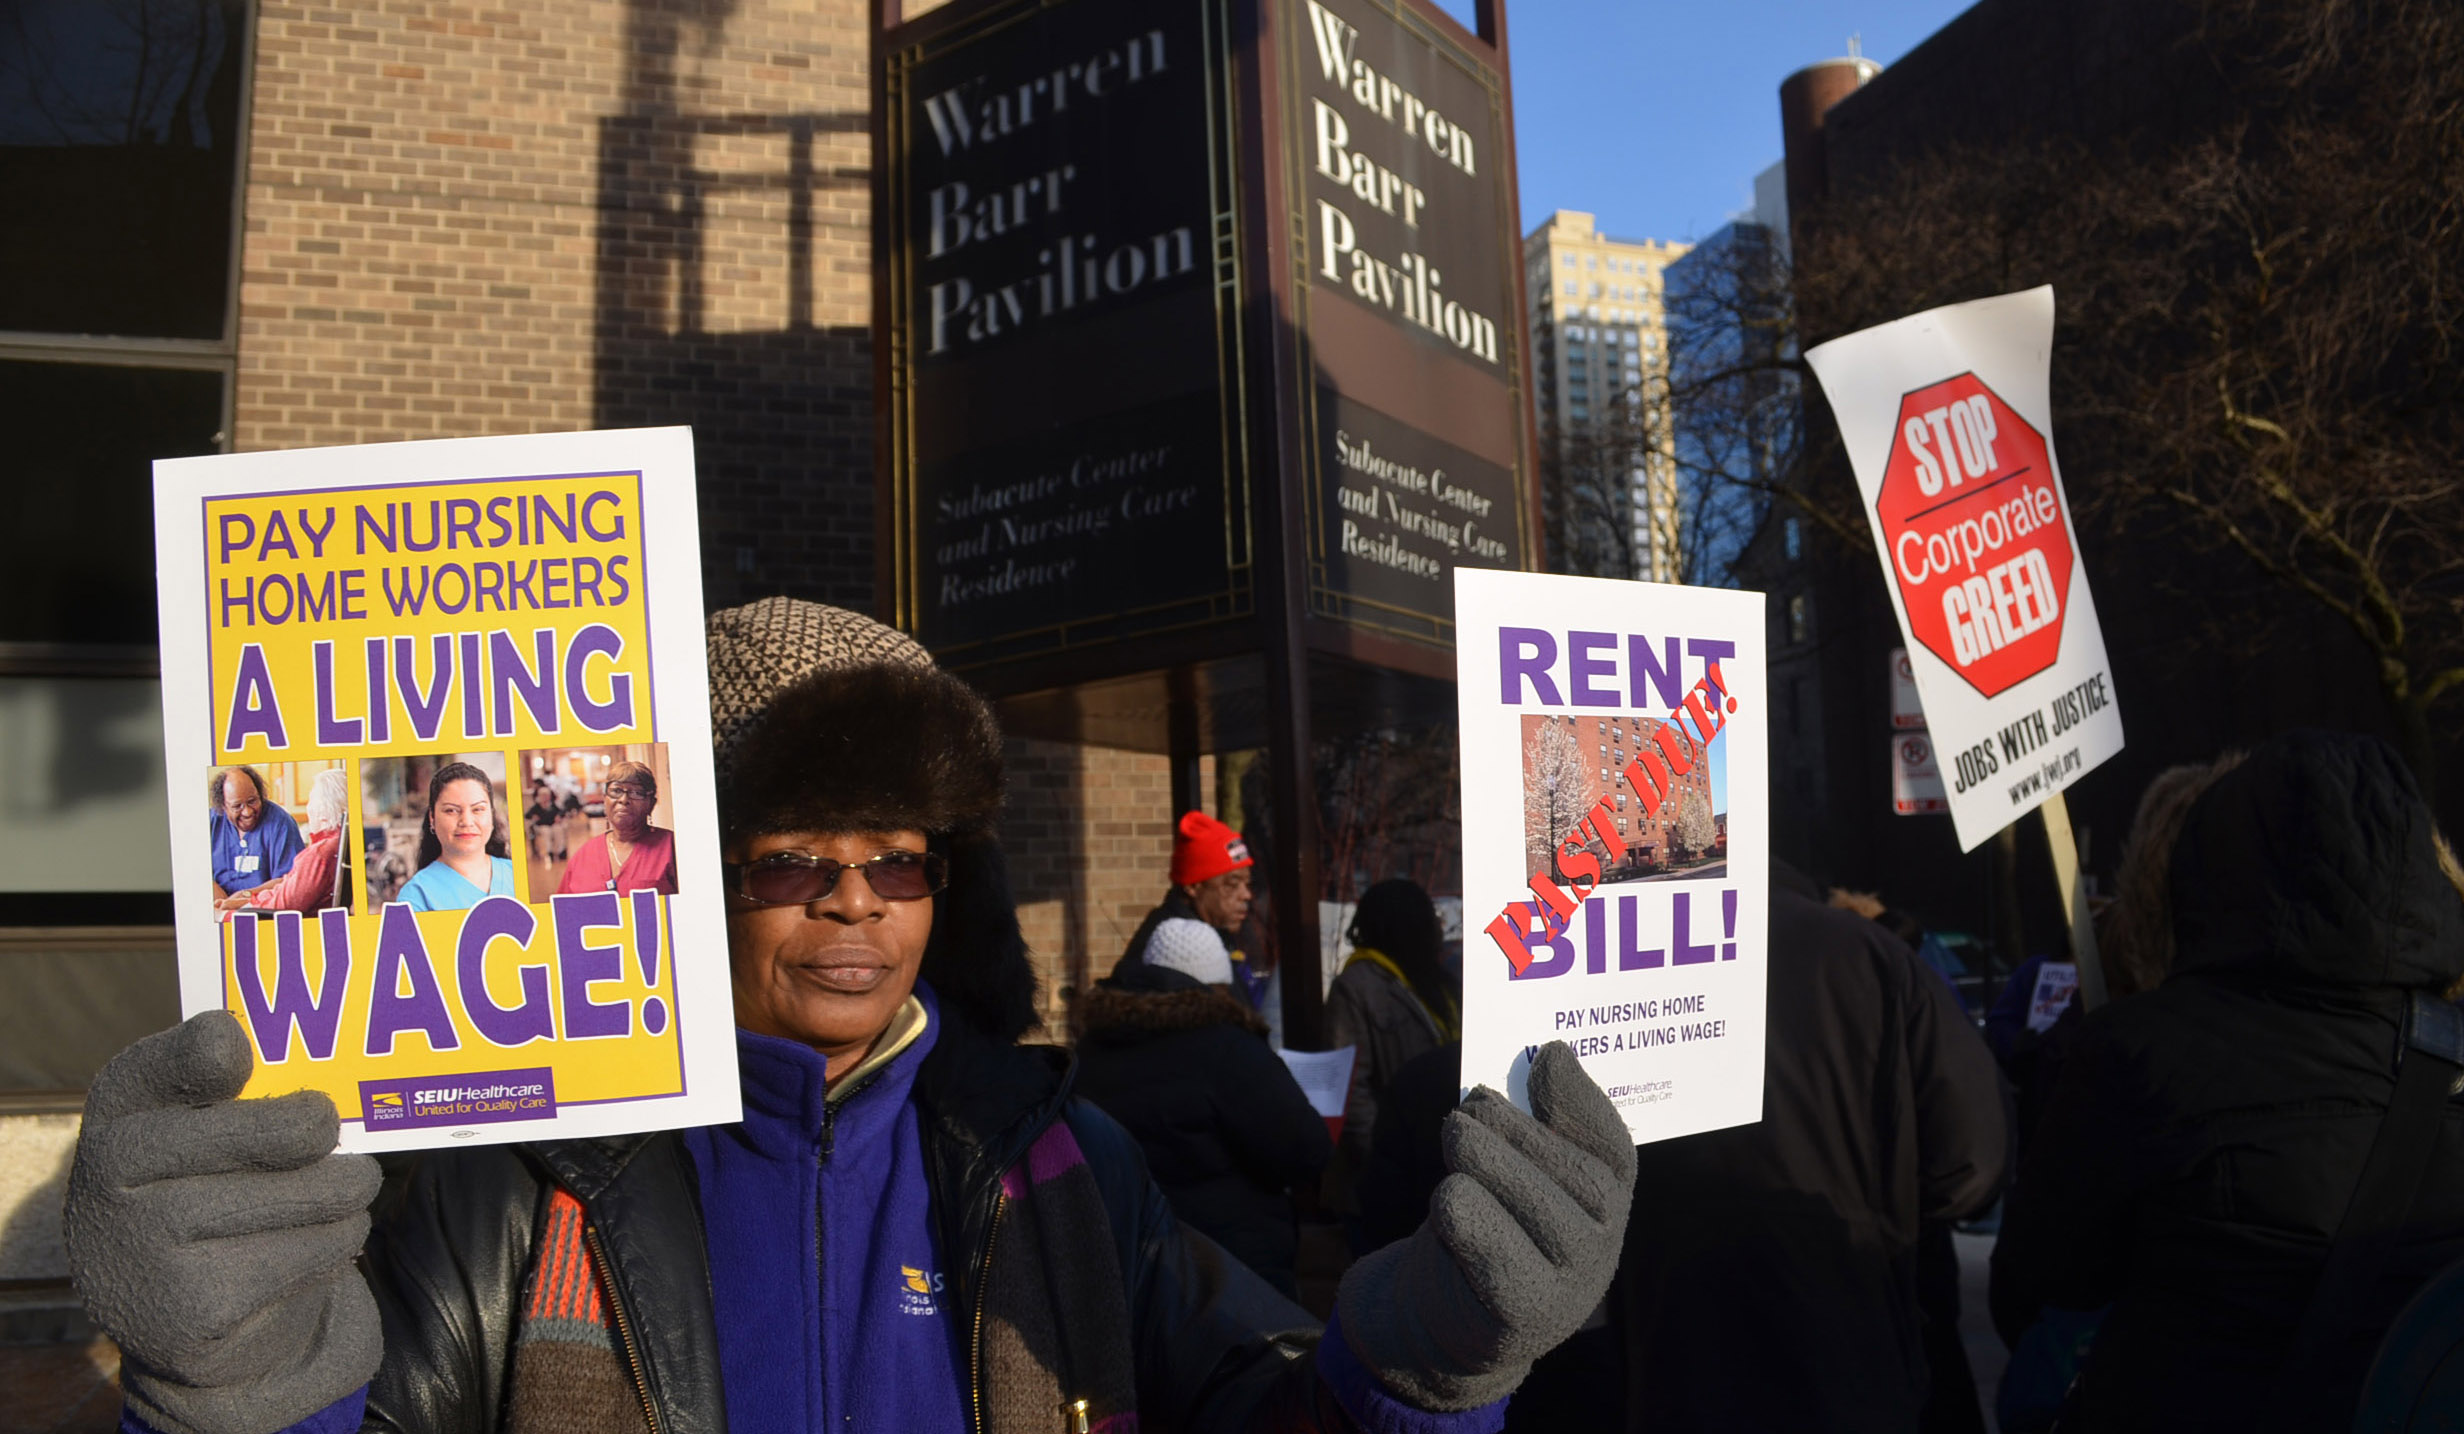 Workers demonstrate for living wages at Warren Barr Pavilion nursing home in Chicago.